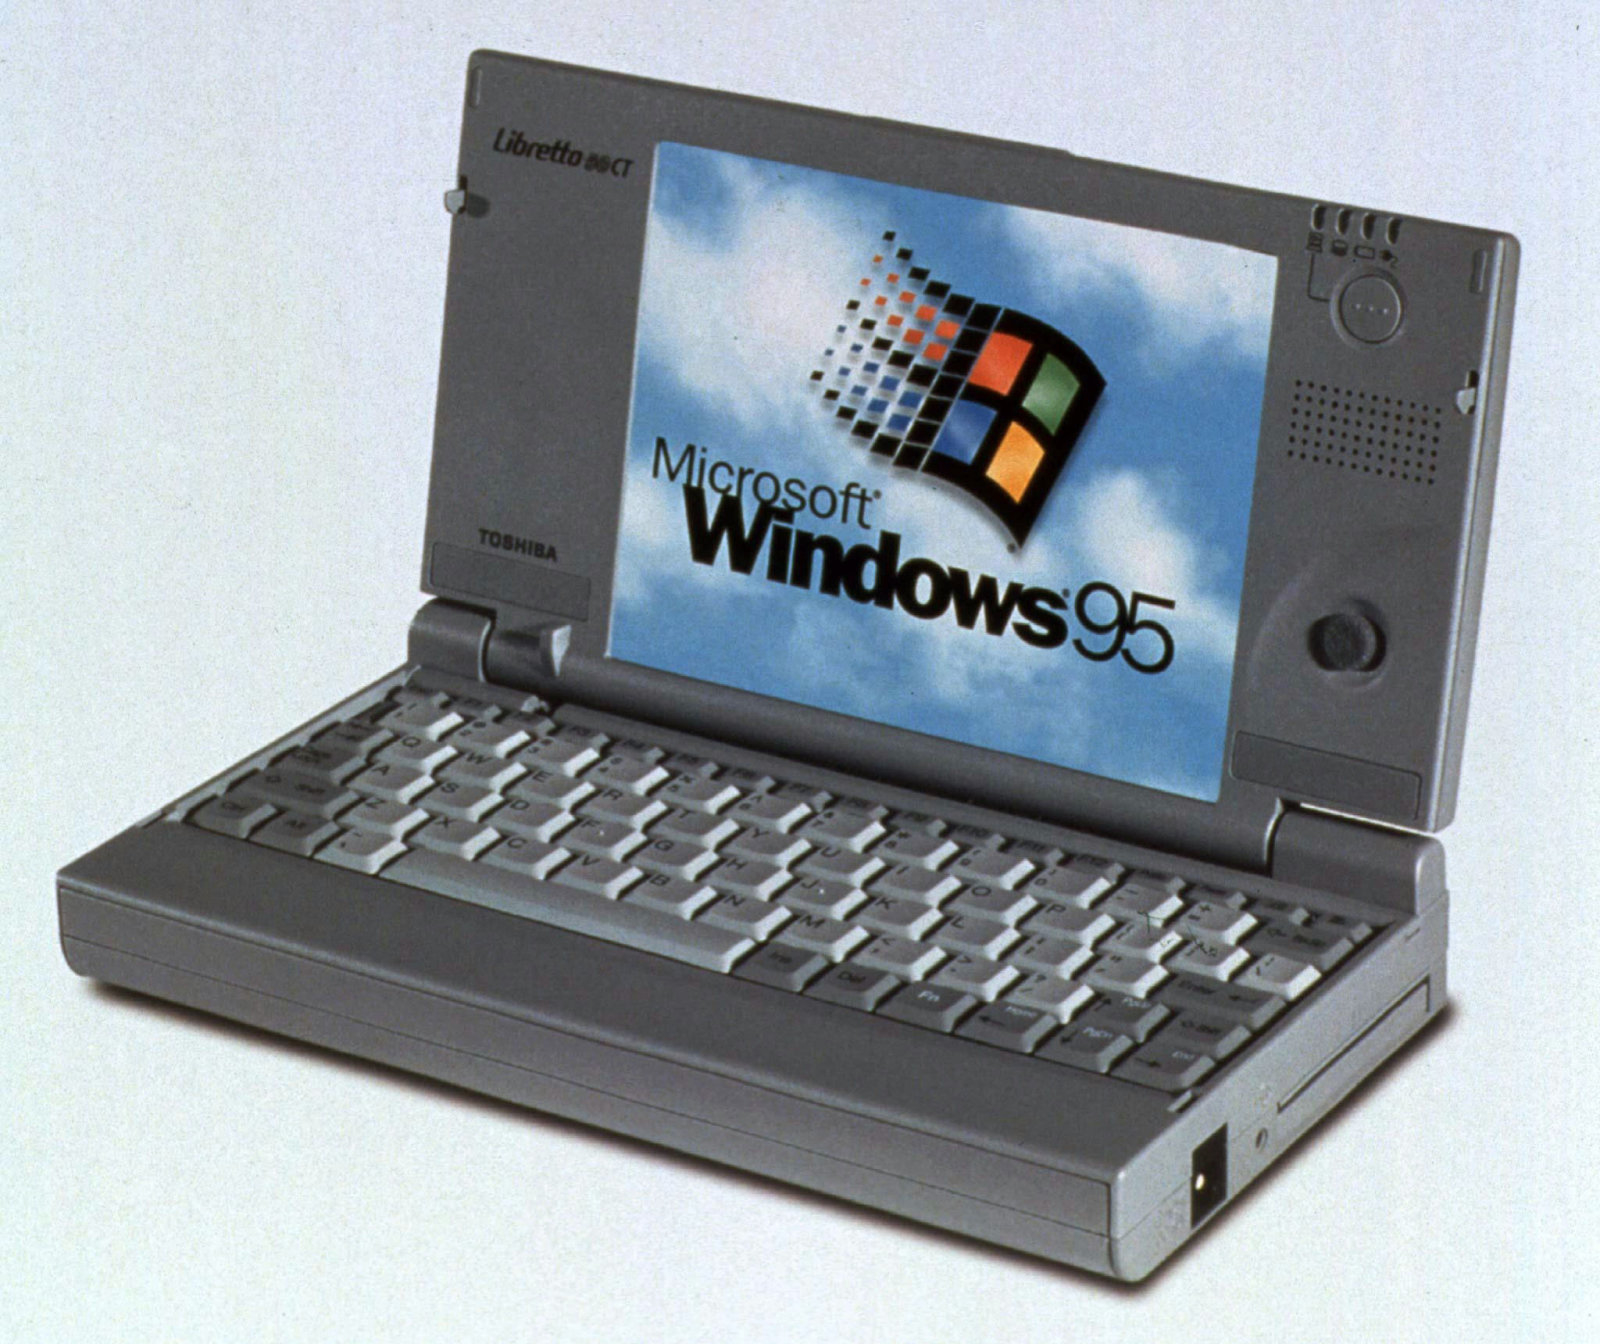 Toshiba's first mini-laptop, the Libretto 50CT was introduced at the Spring Comdex Show at the Georgia World Congress Center on June 2. The mini-notebook with a 75MHz Pentium processor, Windows 95 and a 810 million byte hard drive is expected to retail at $1,999.